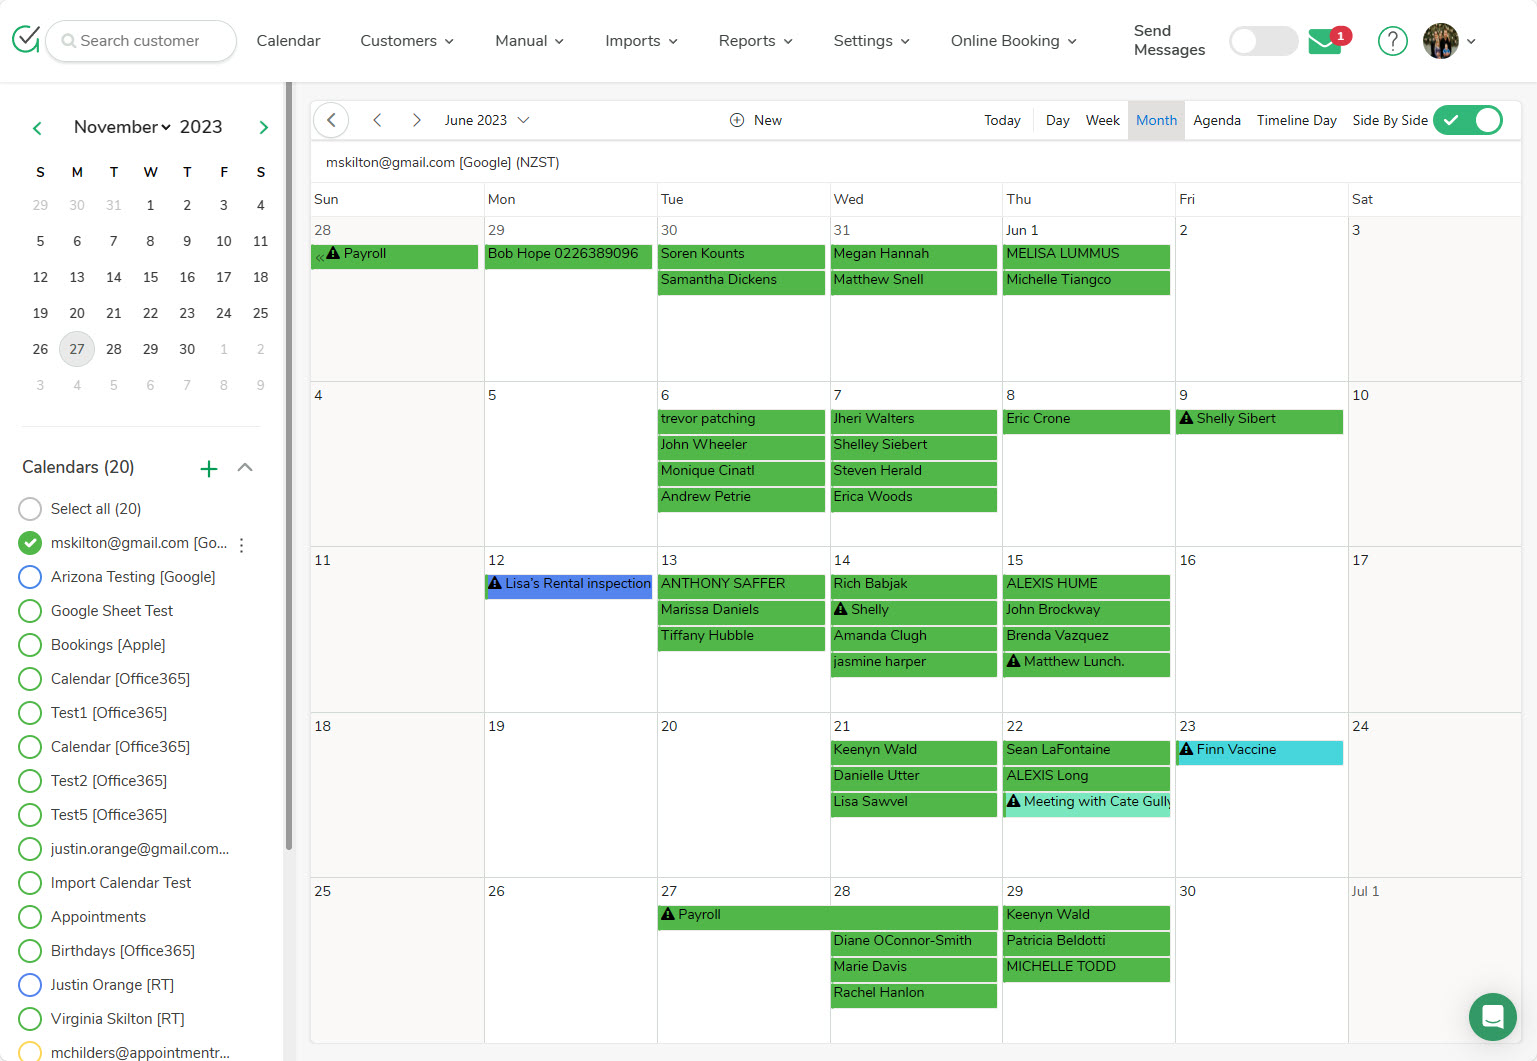 Built-In Appointment Reminder Calendar